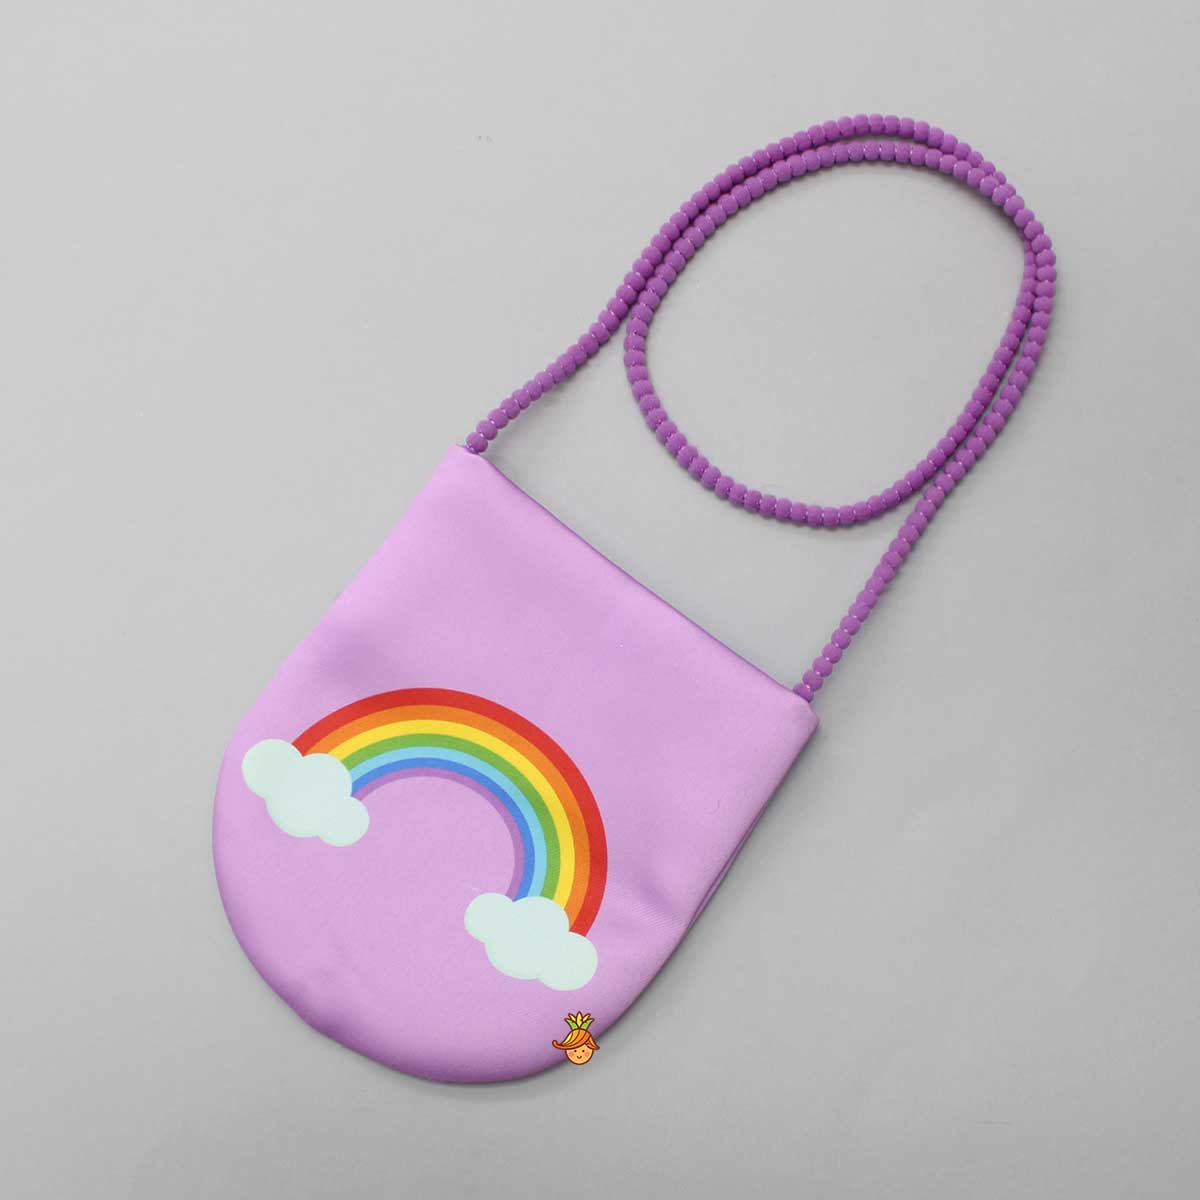 Lavender Rainbow Dress With Matching Sling Bag